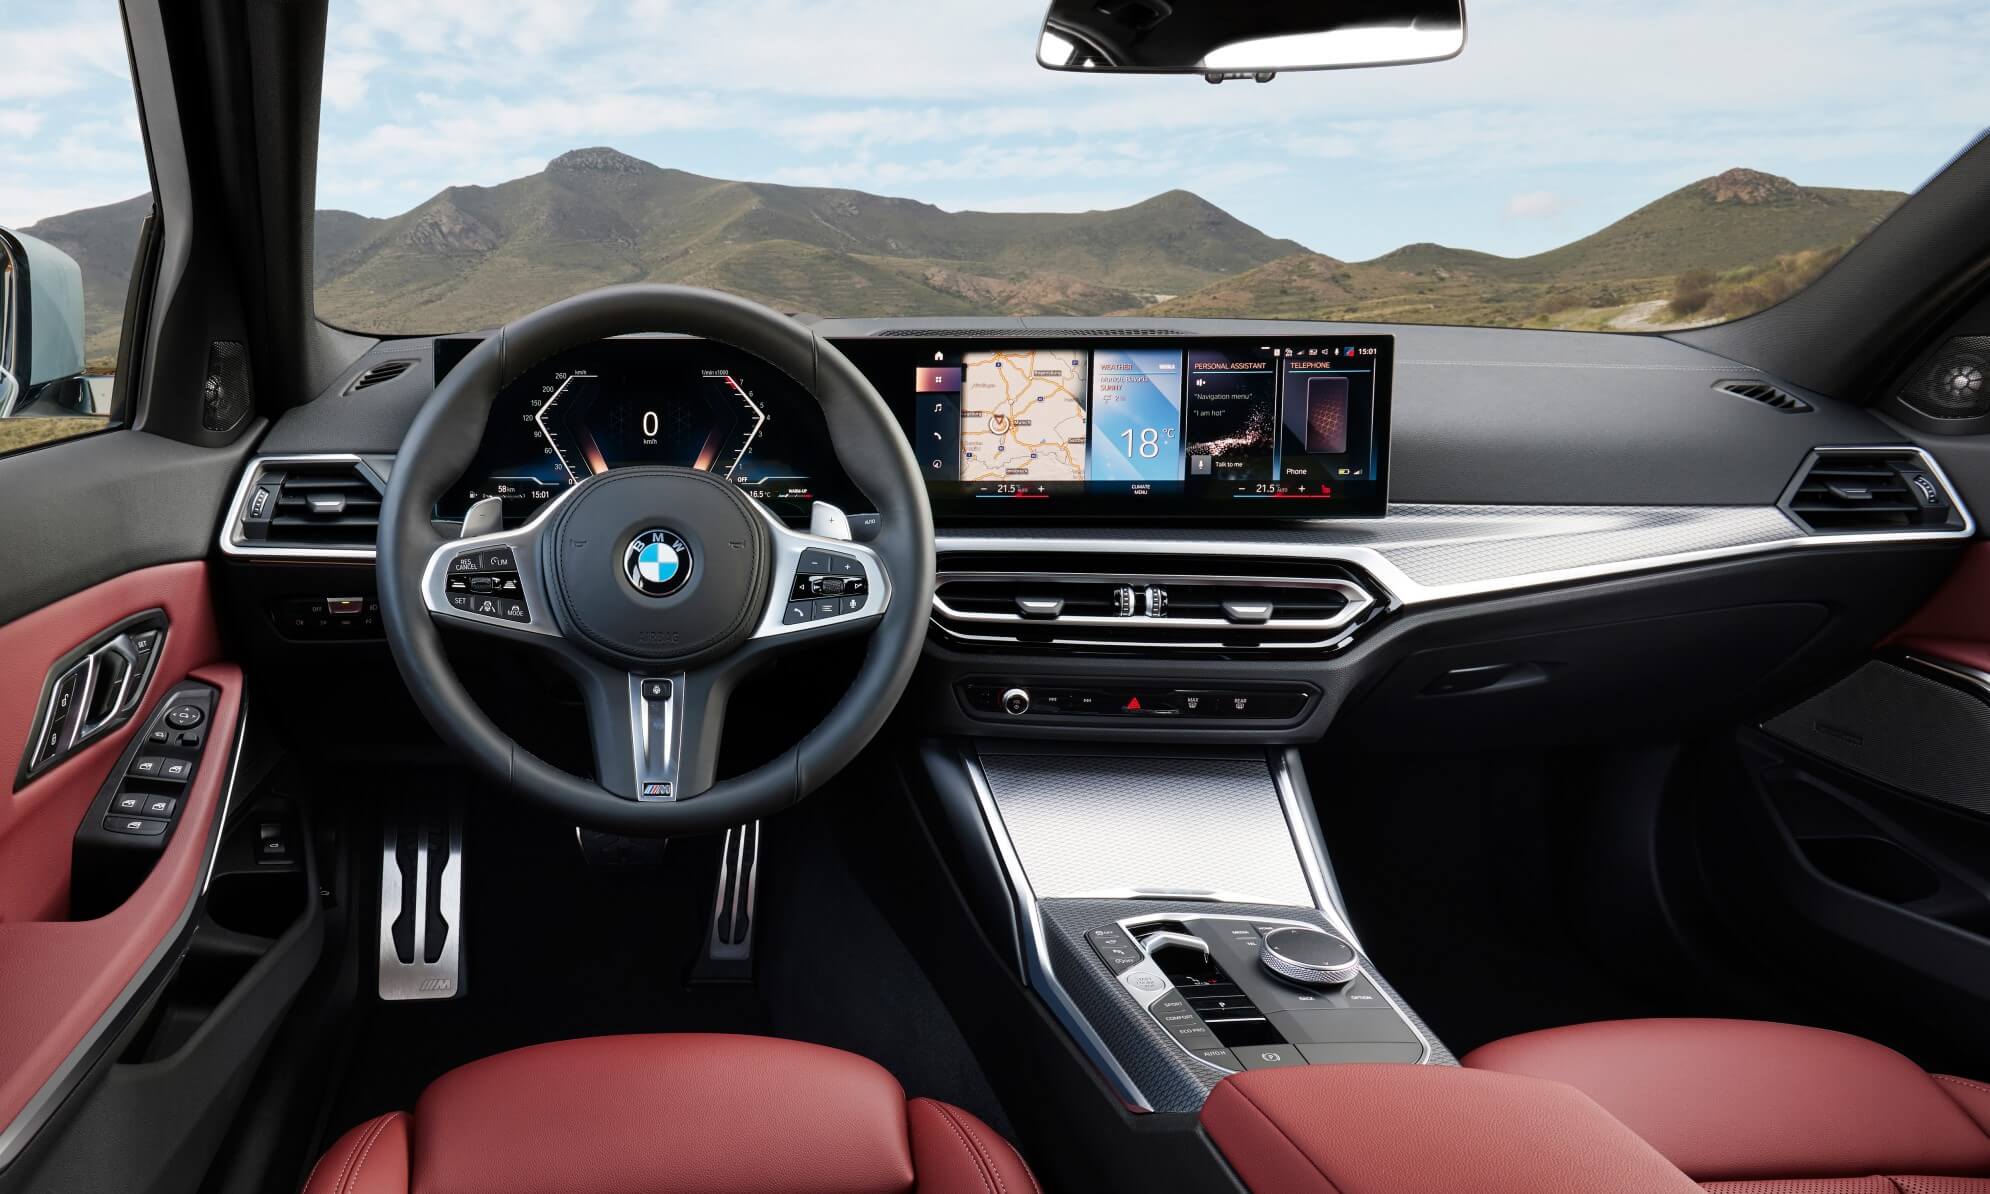 Facelifted 3 Series BMW interior